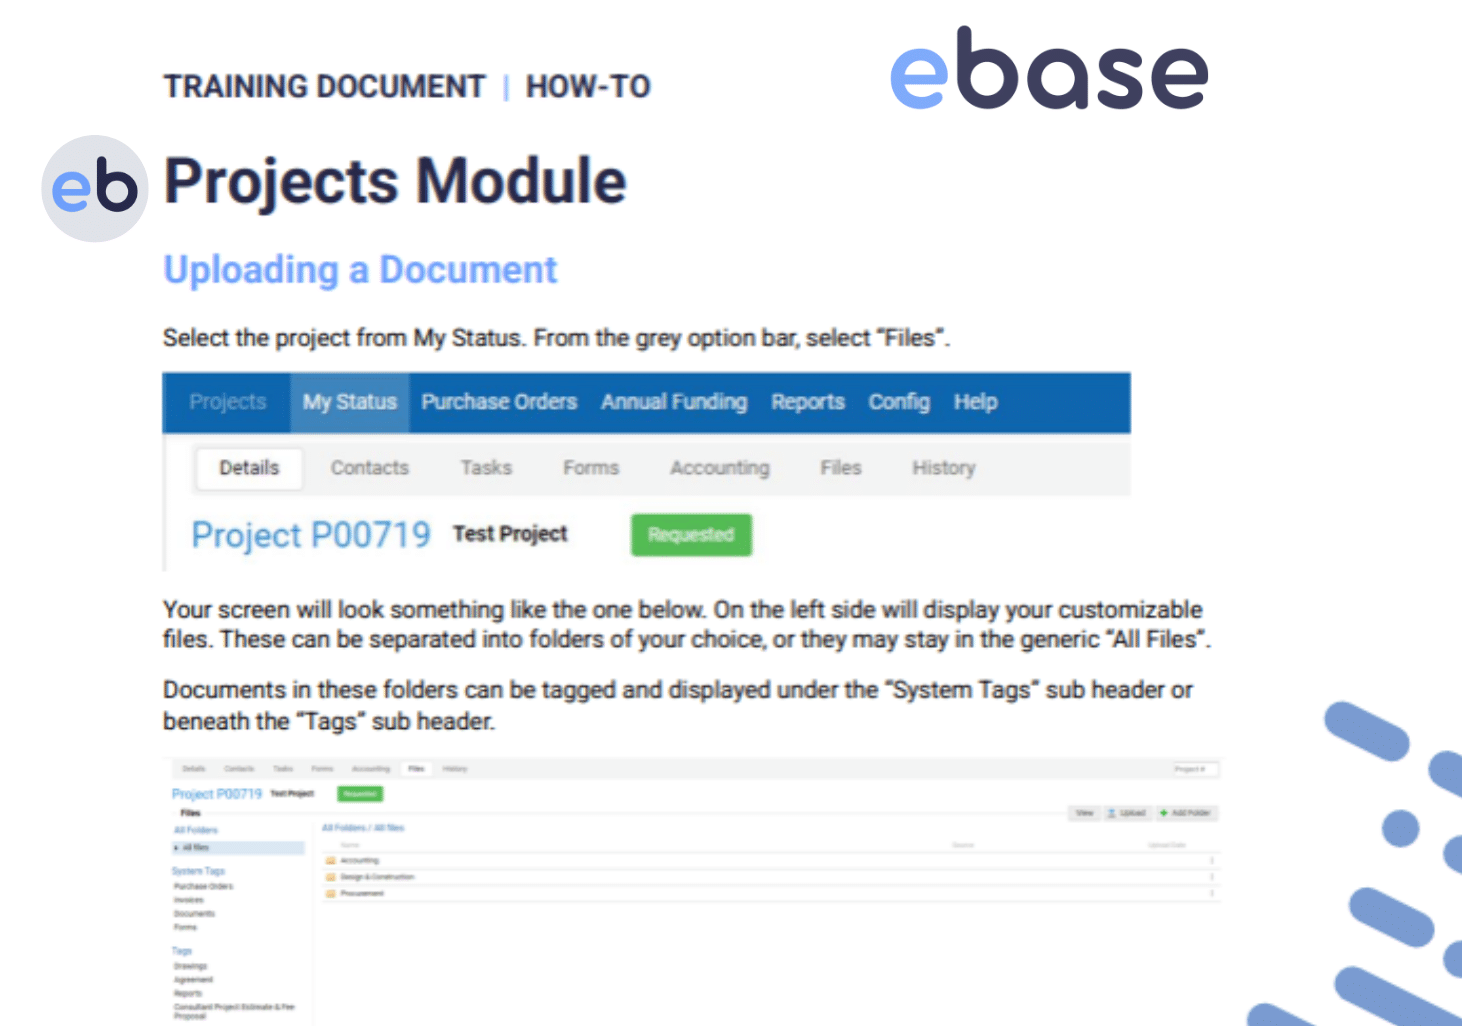 How to utilize the ebase projects module for facility rentals and training modules.